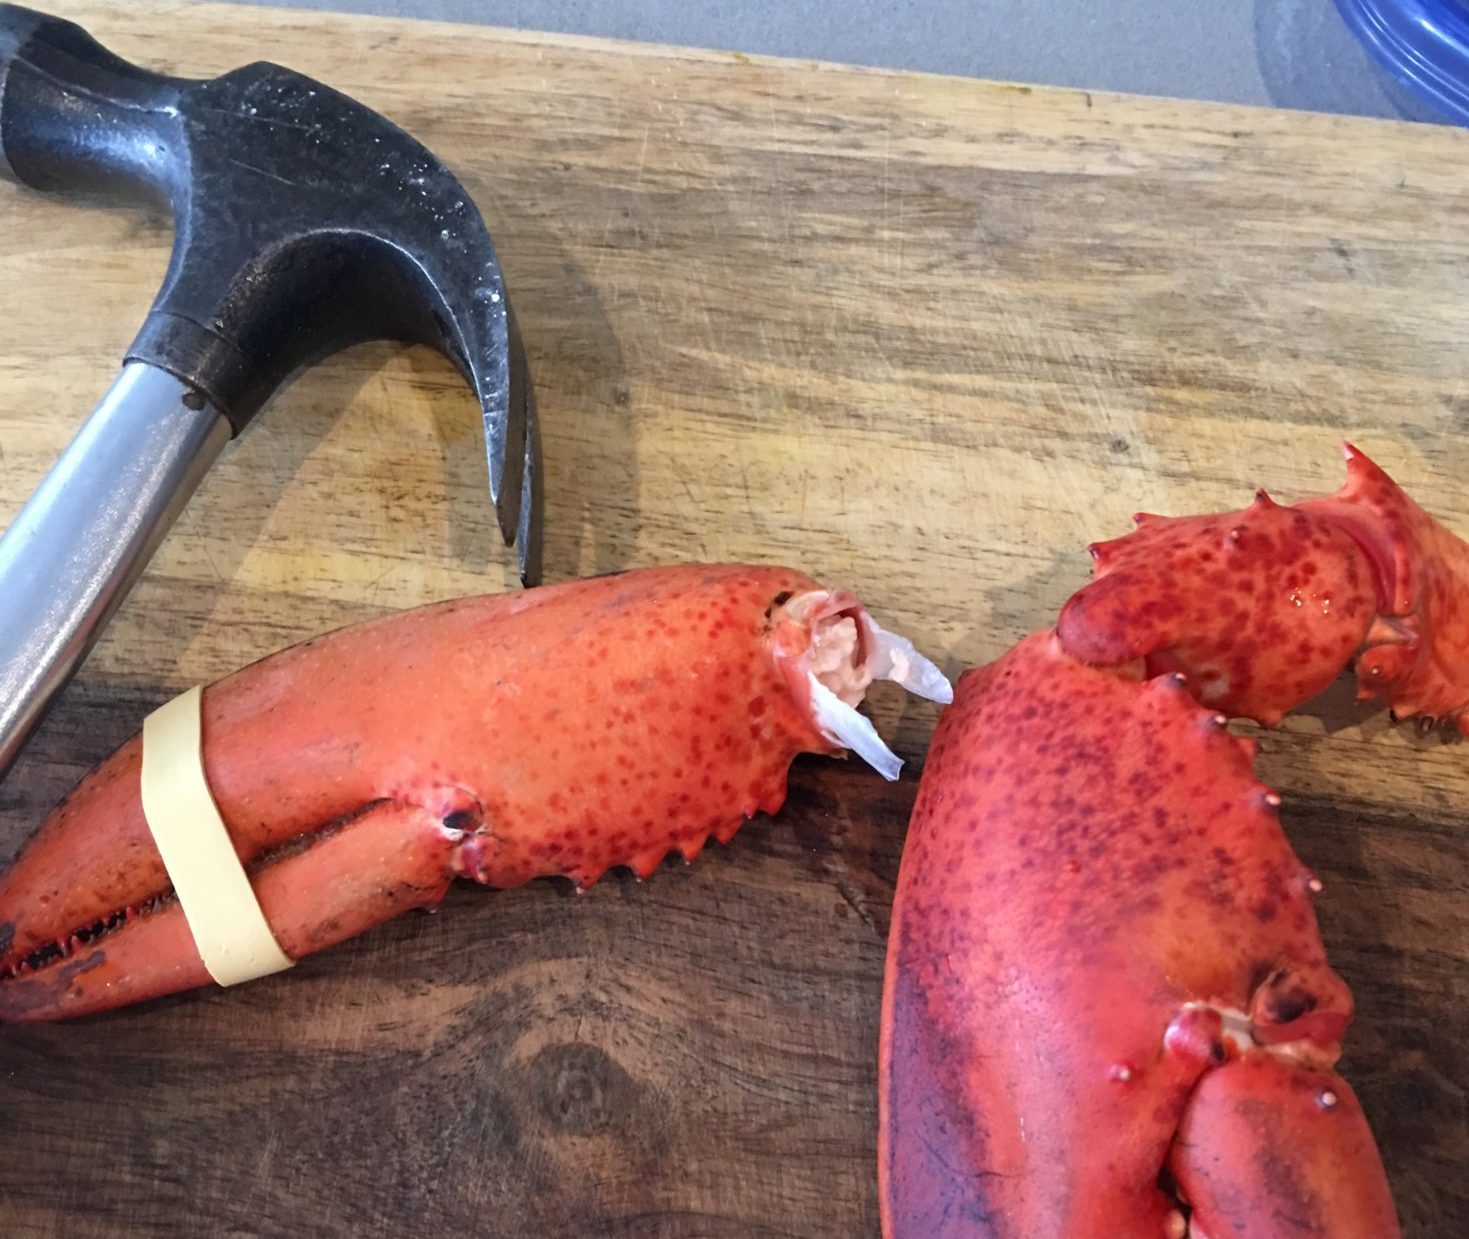 Hammer and lobster claws